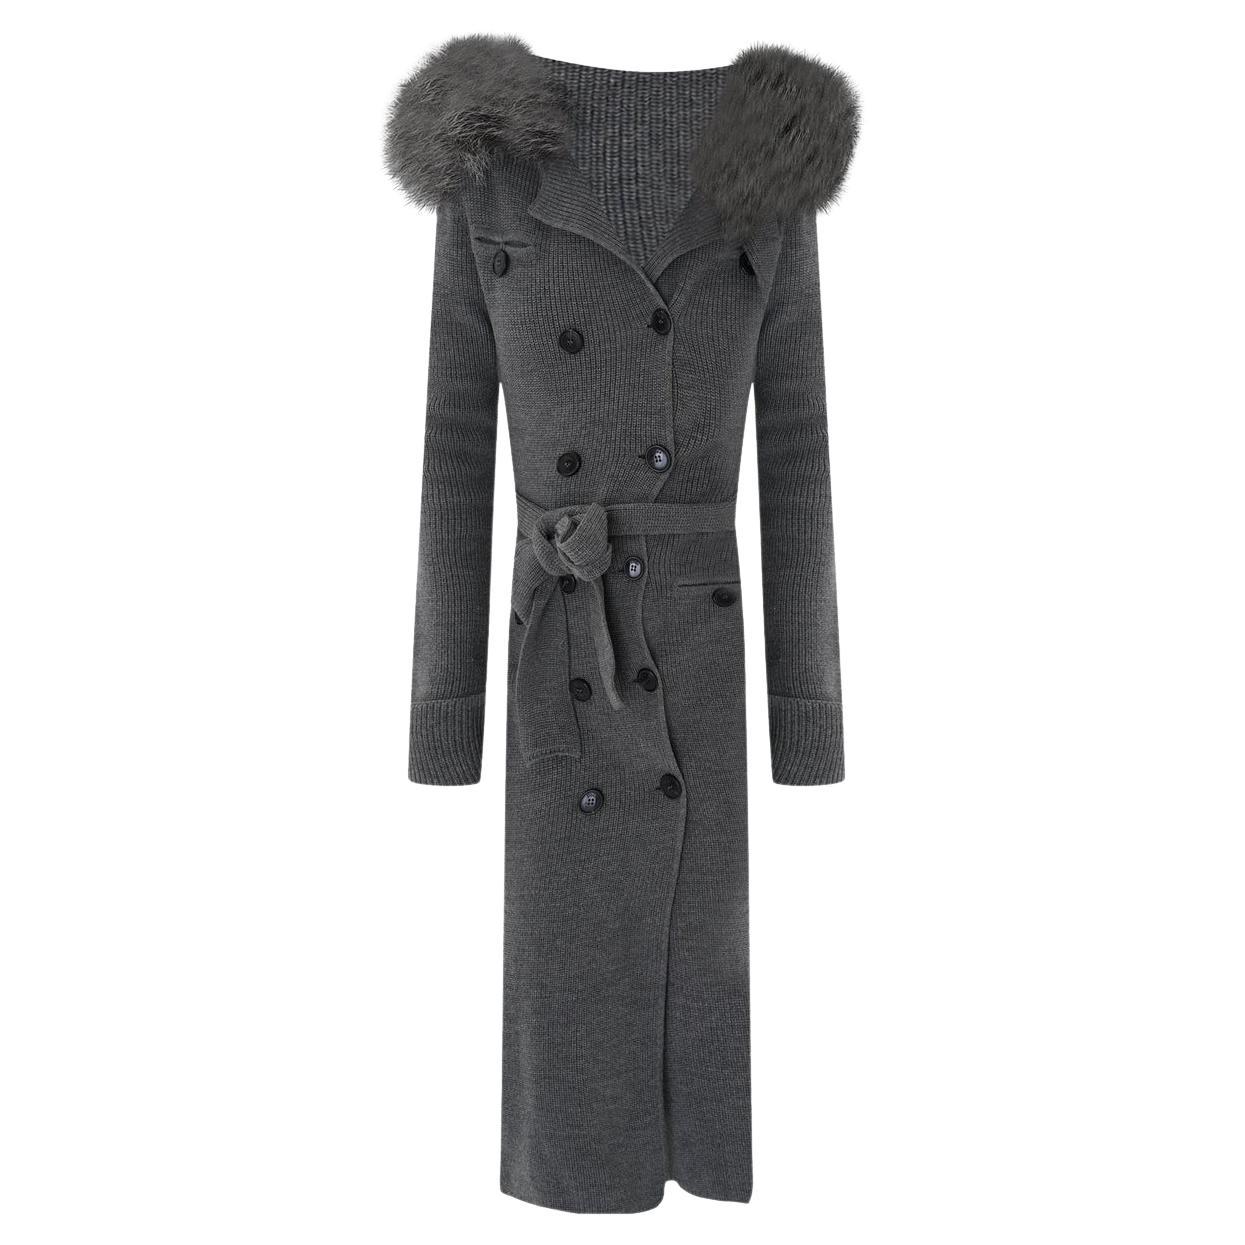 Christian Dior & John Galliano  2010 combined knitted wool coat For Sale